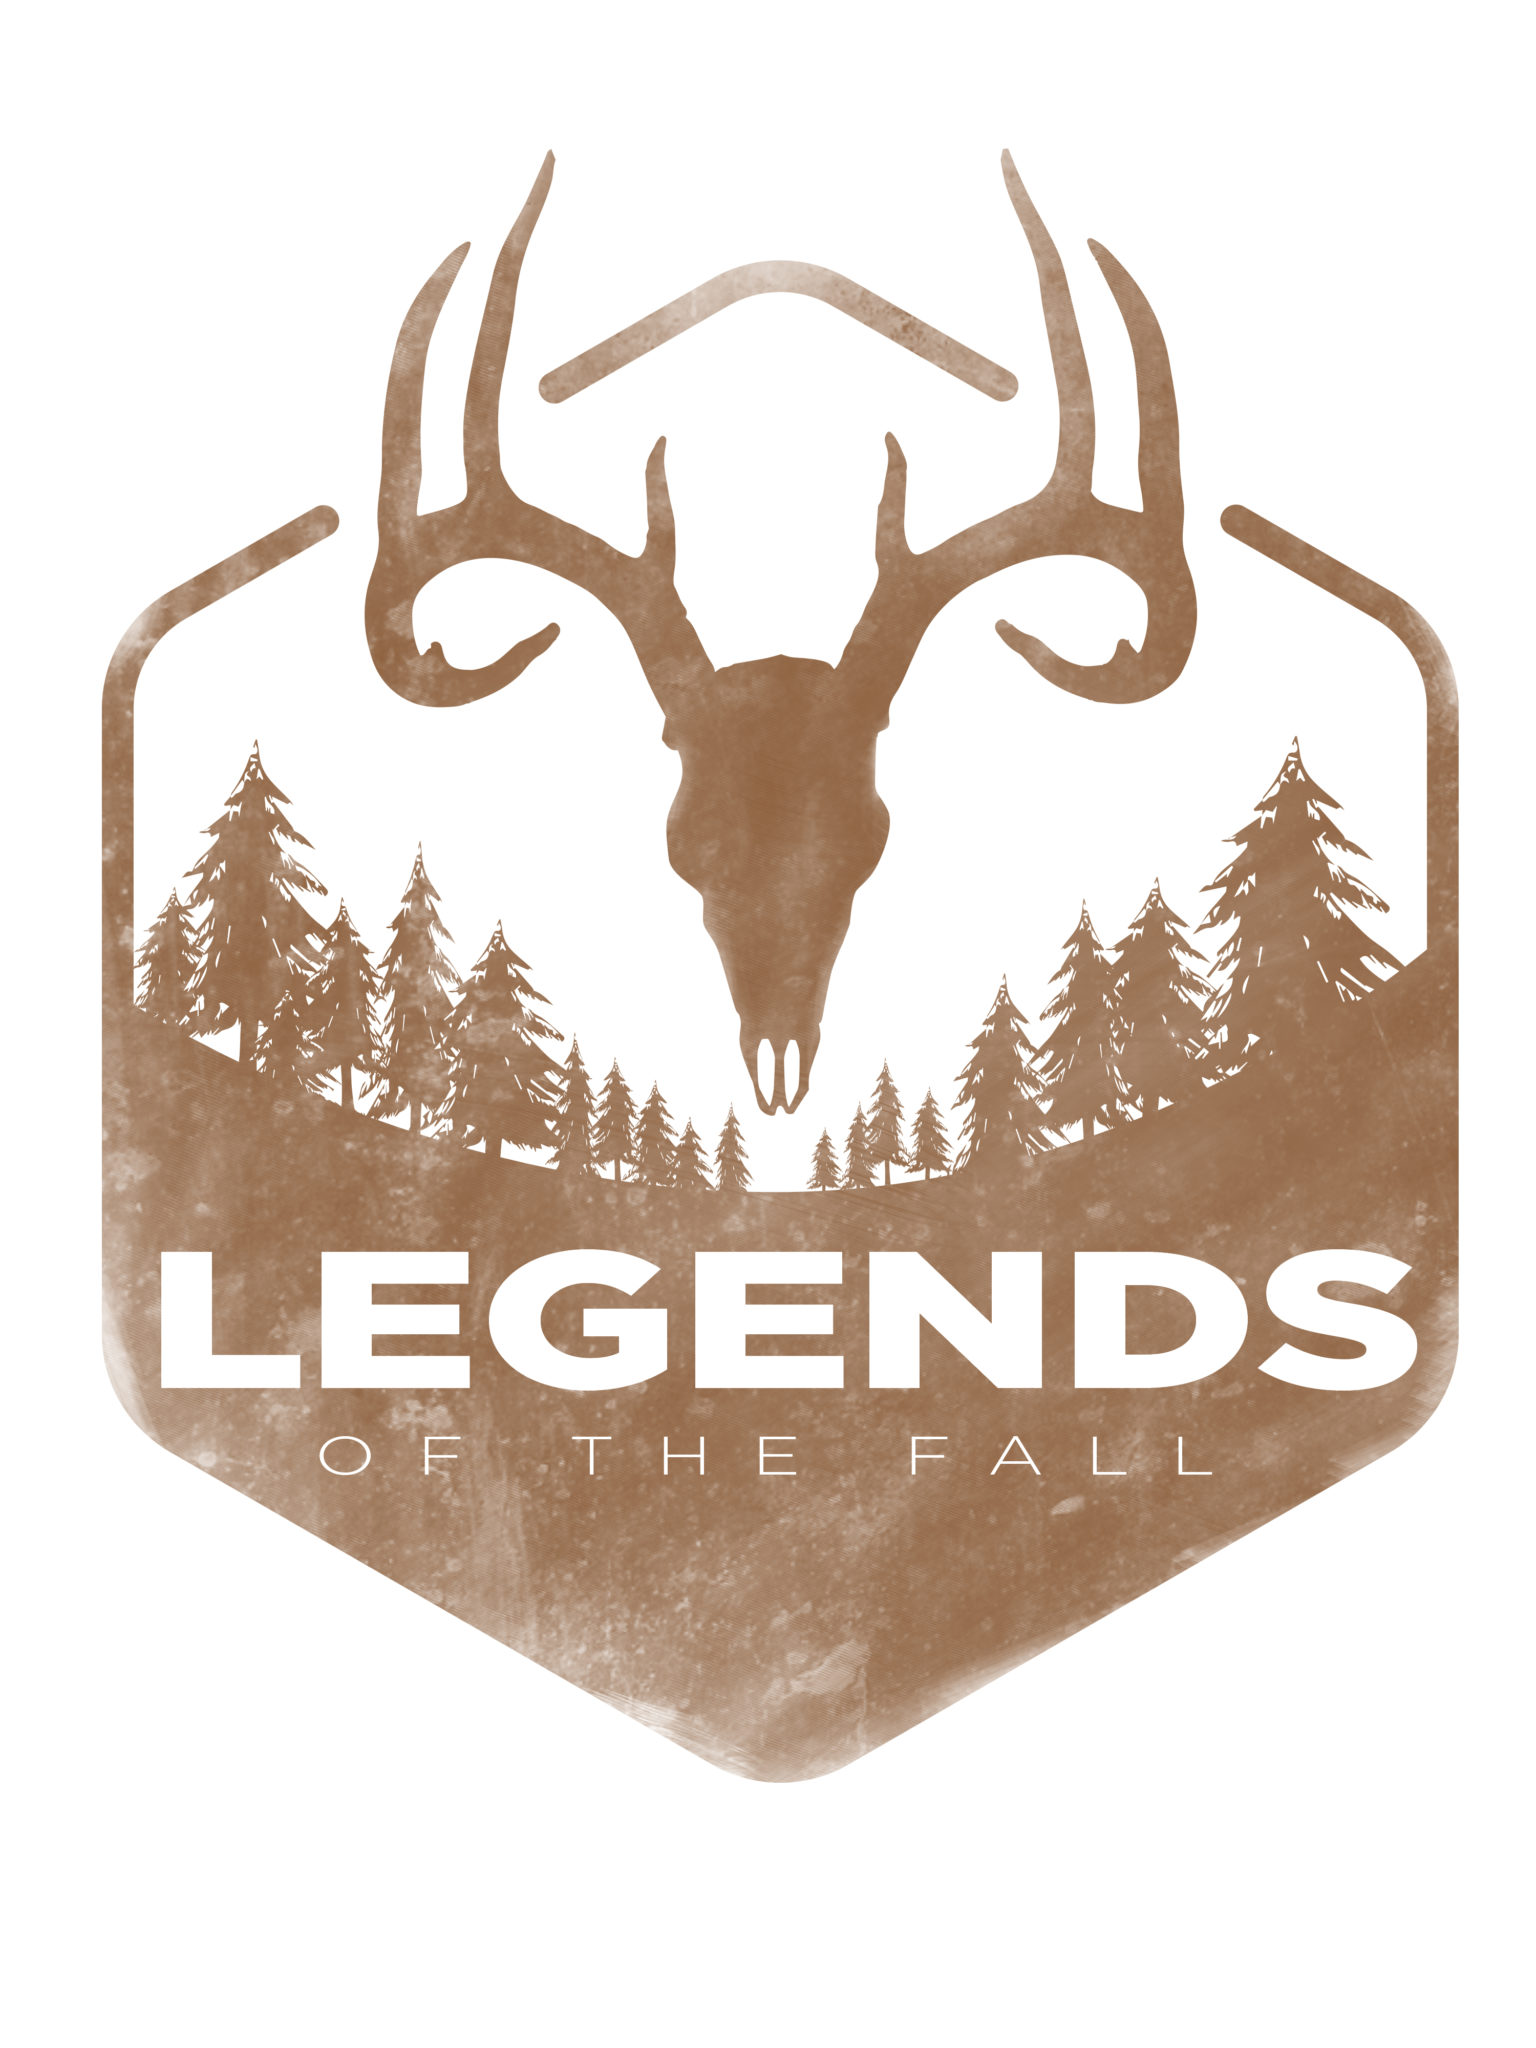 The Legends of the Fall